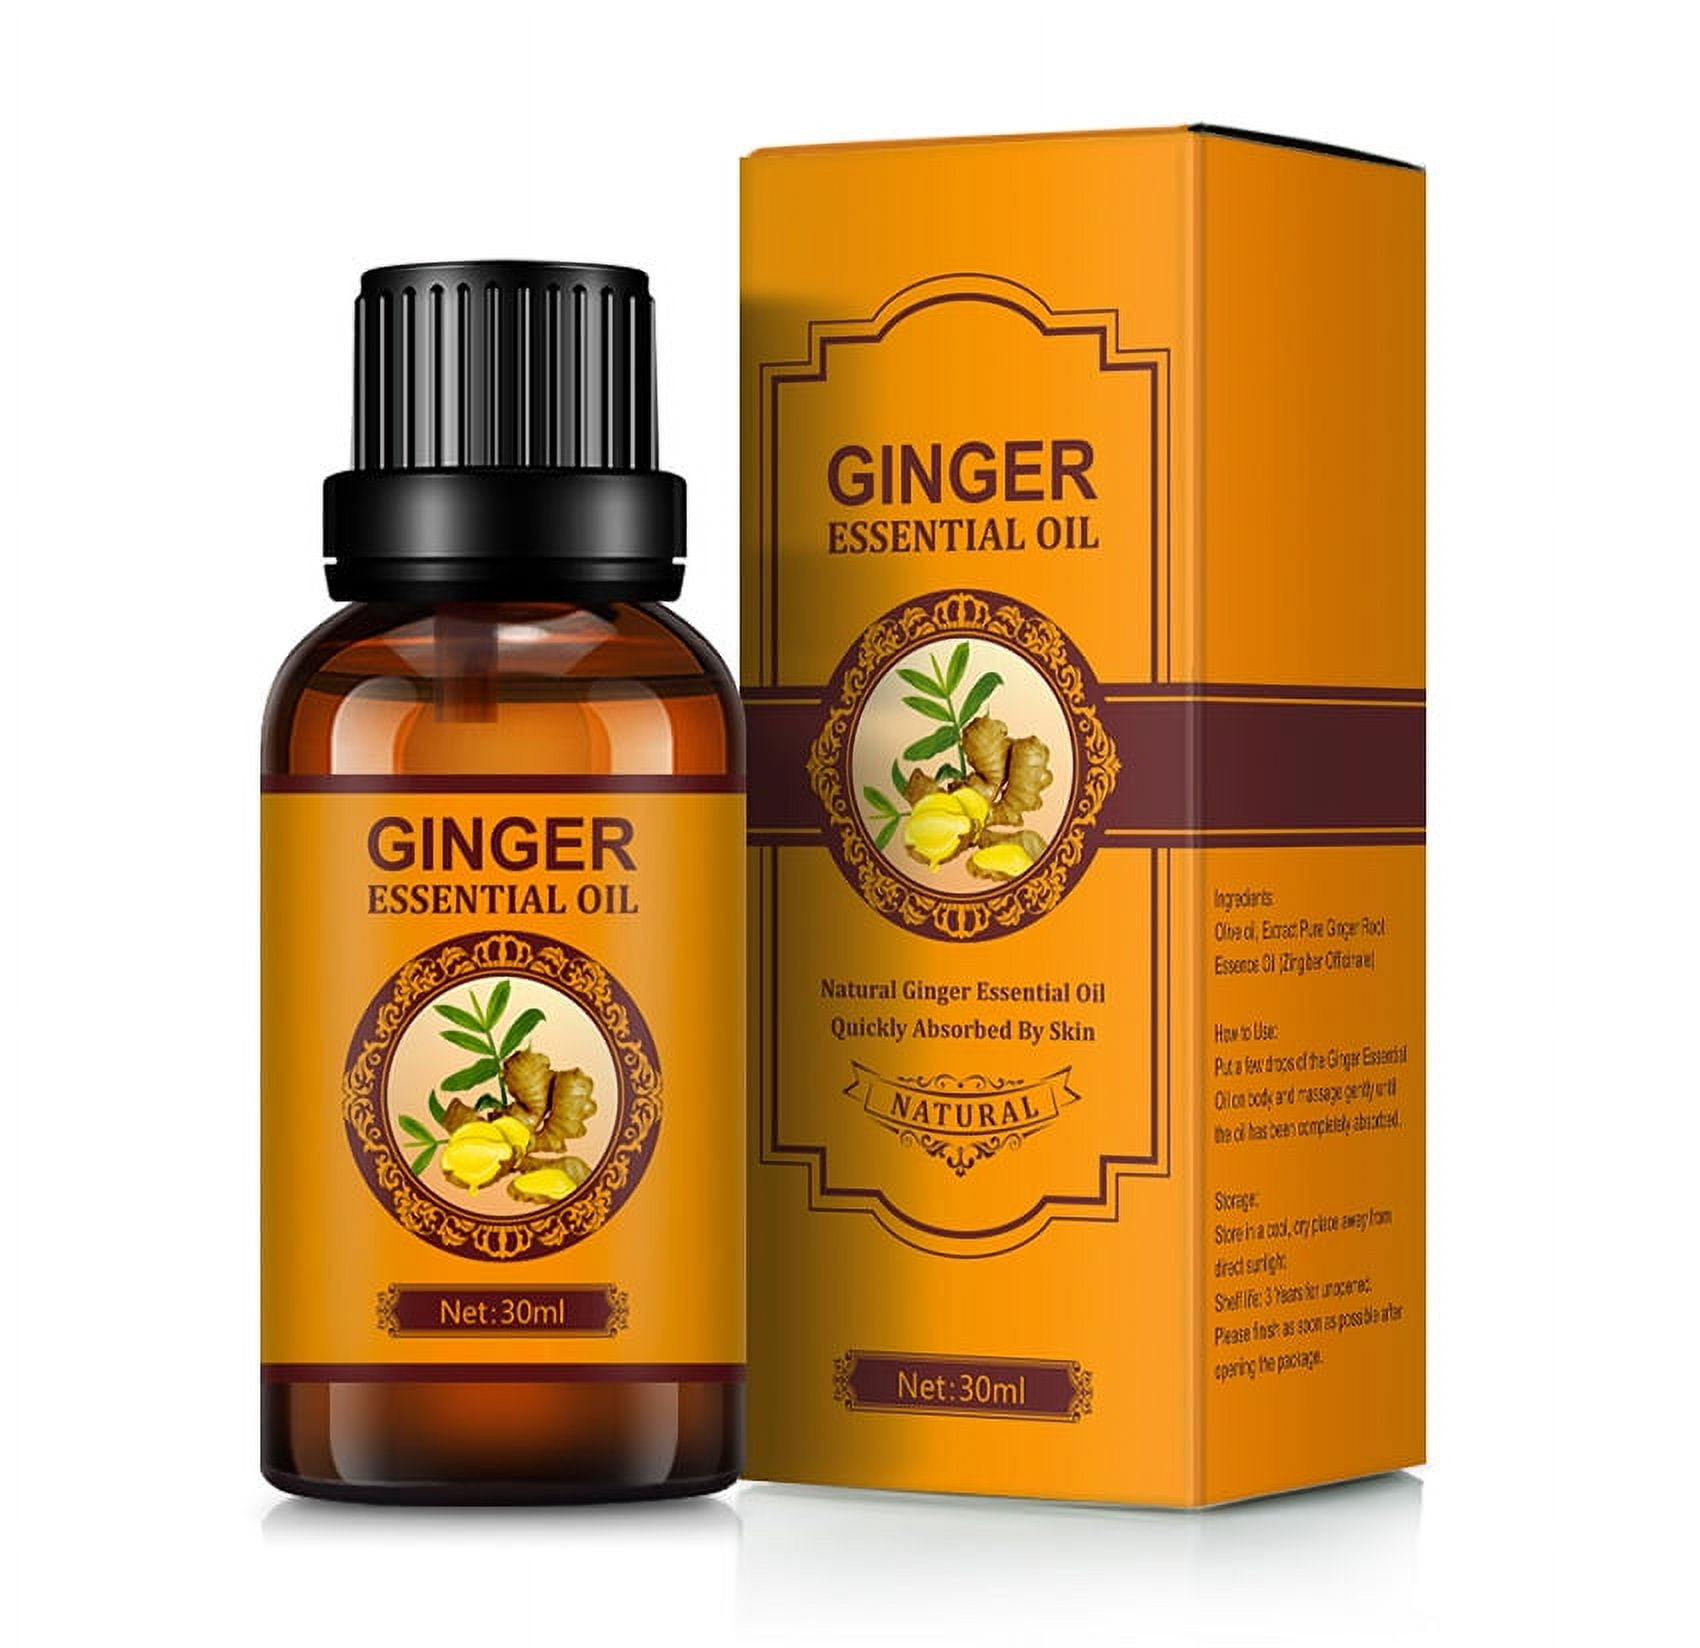 QLOUNI 100% PURE Drainage Ginger Oil, Essential Oils, Ginger